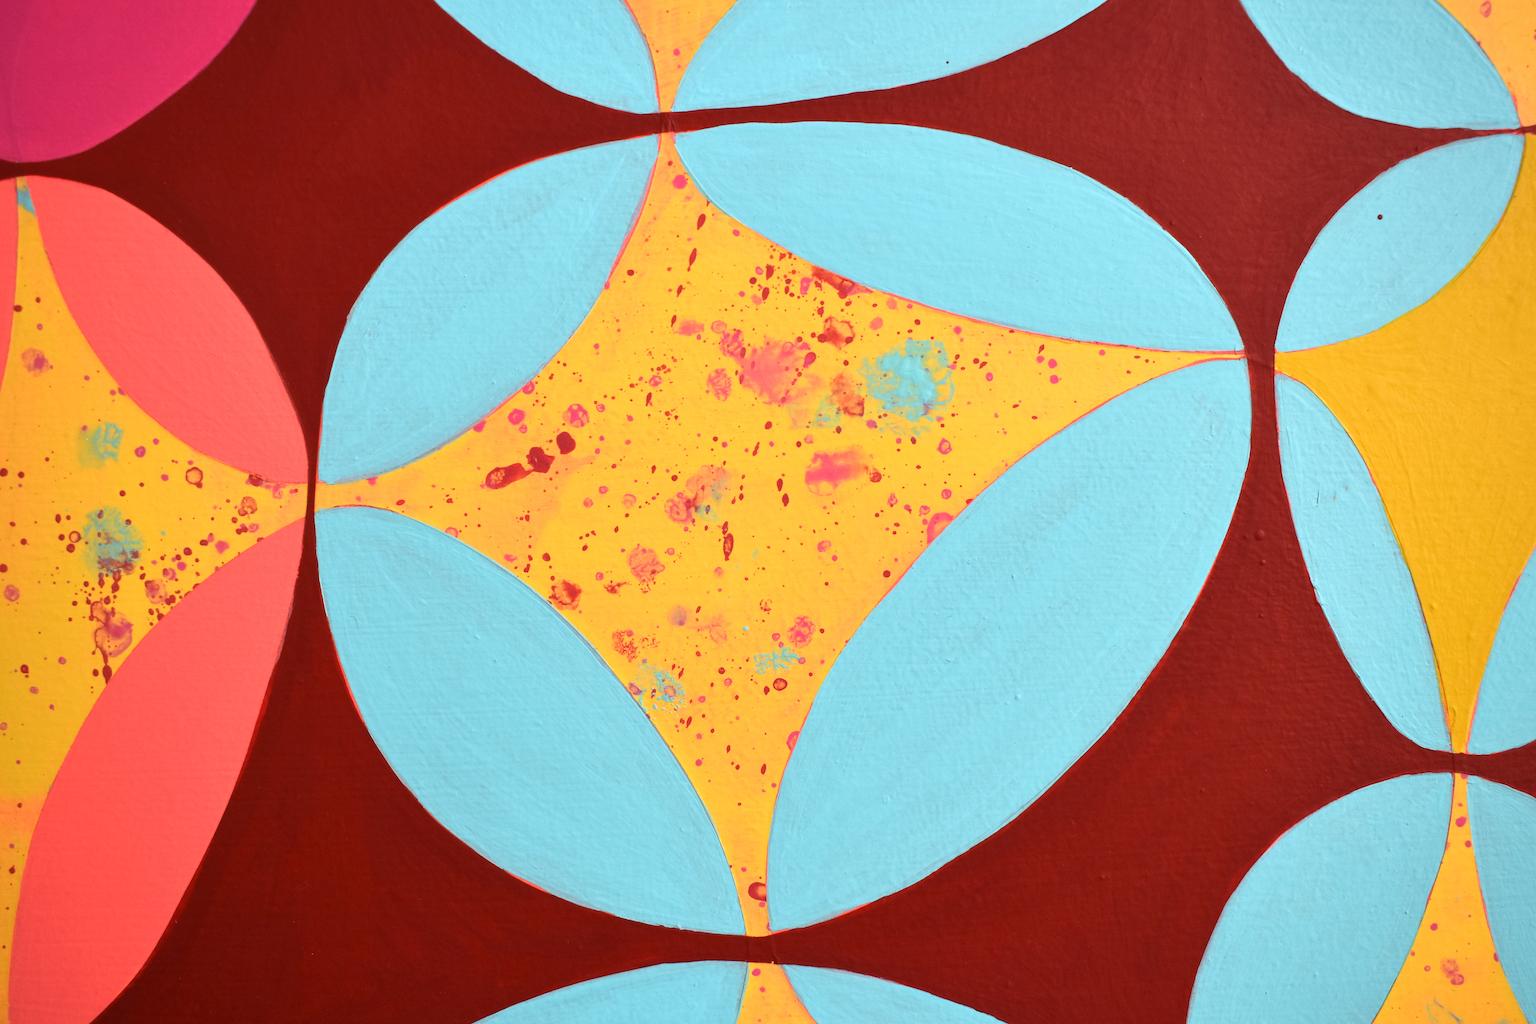 Denise Driscoll’s “Confluence 1” is a 30 x 30 inch abstract painting hundreds of small overlapping ovals that are broken into slivers of highly saturated color including orange, blue and green. The surface is a velvety matte, with background and